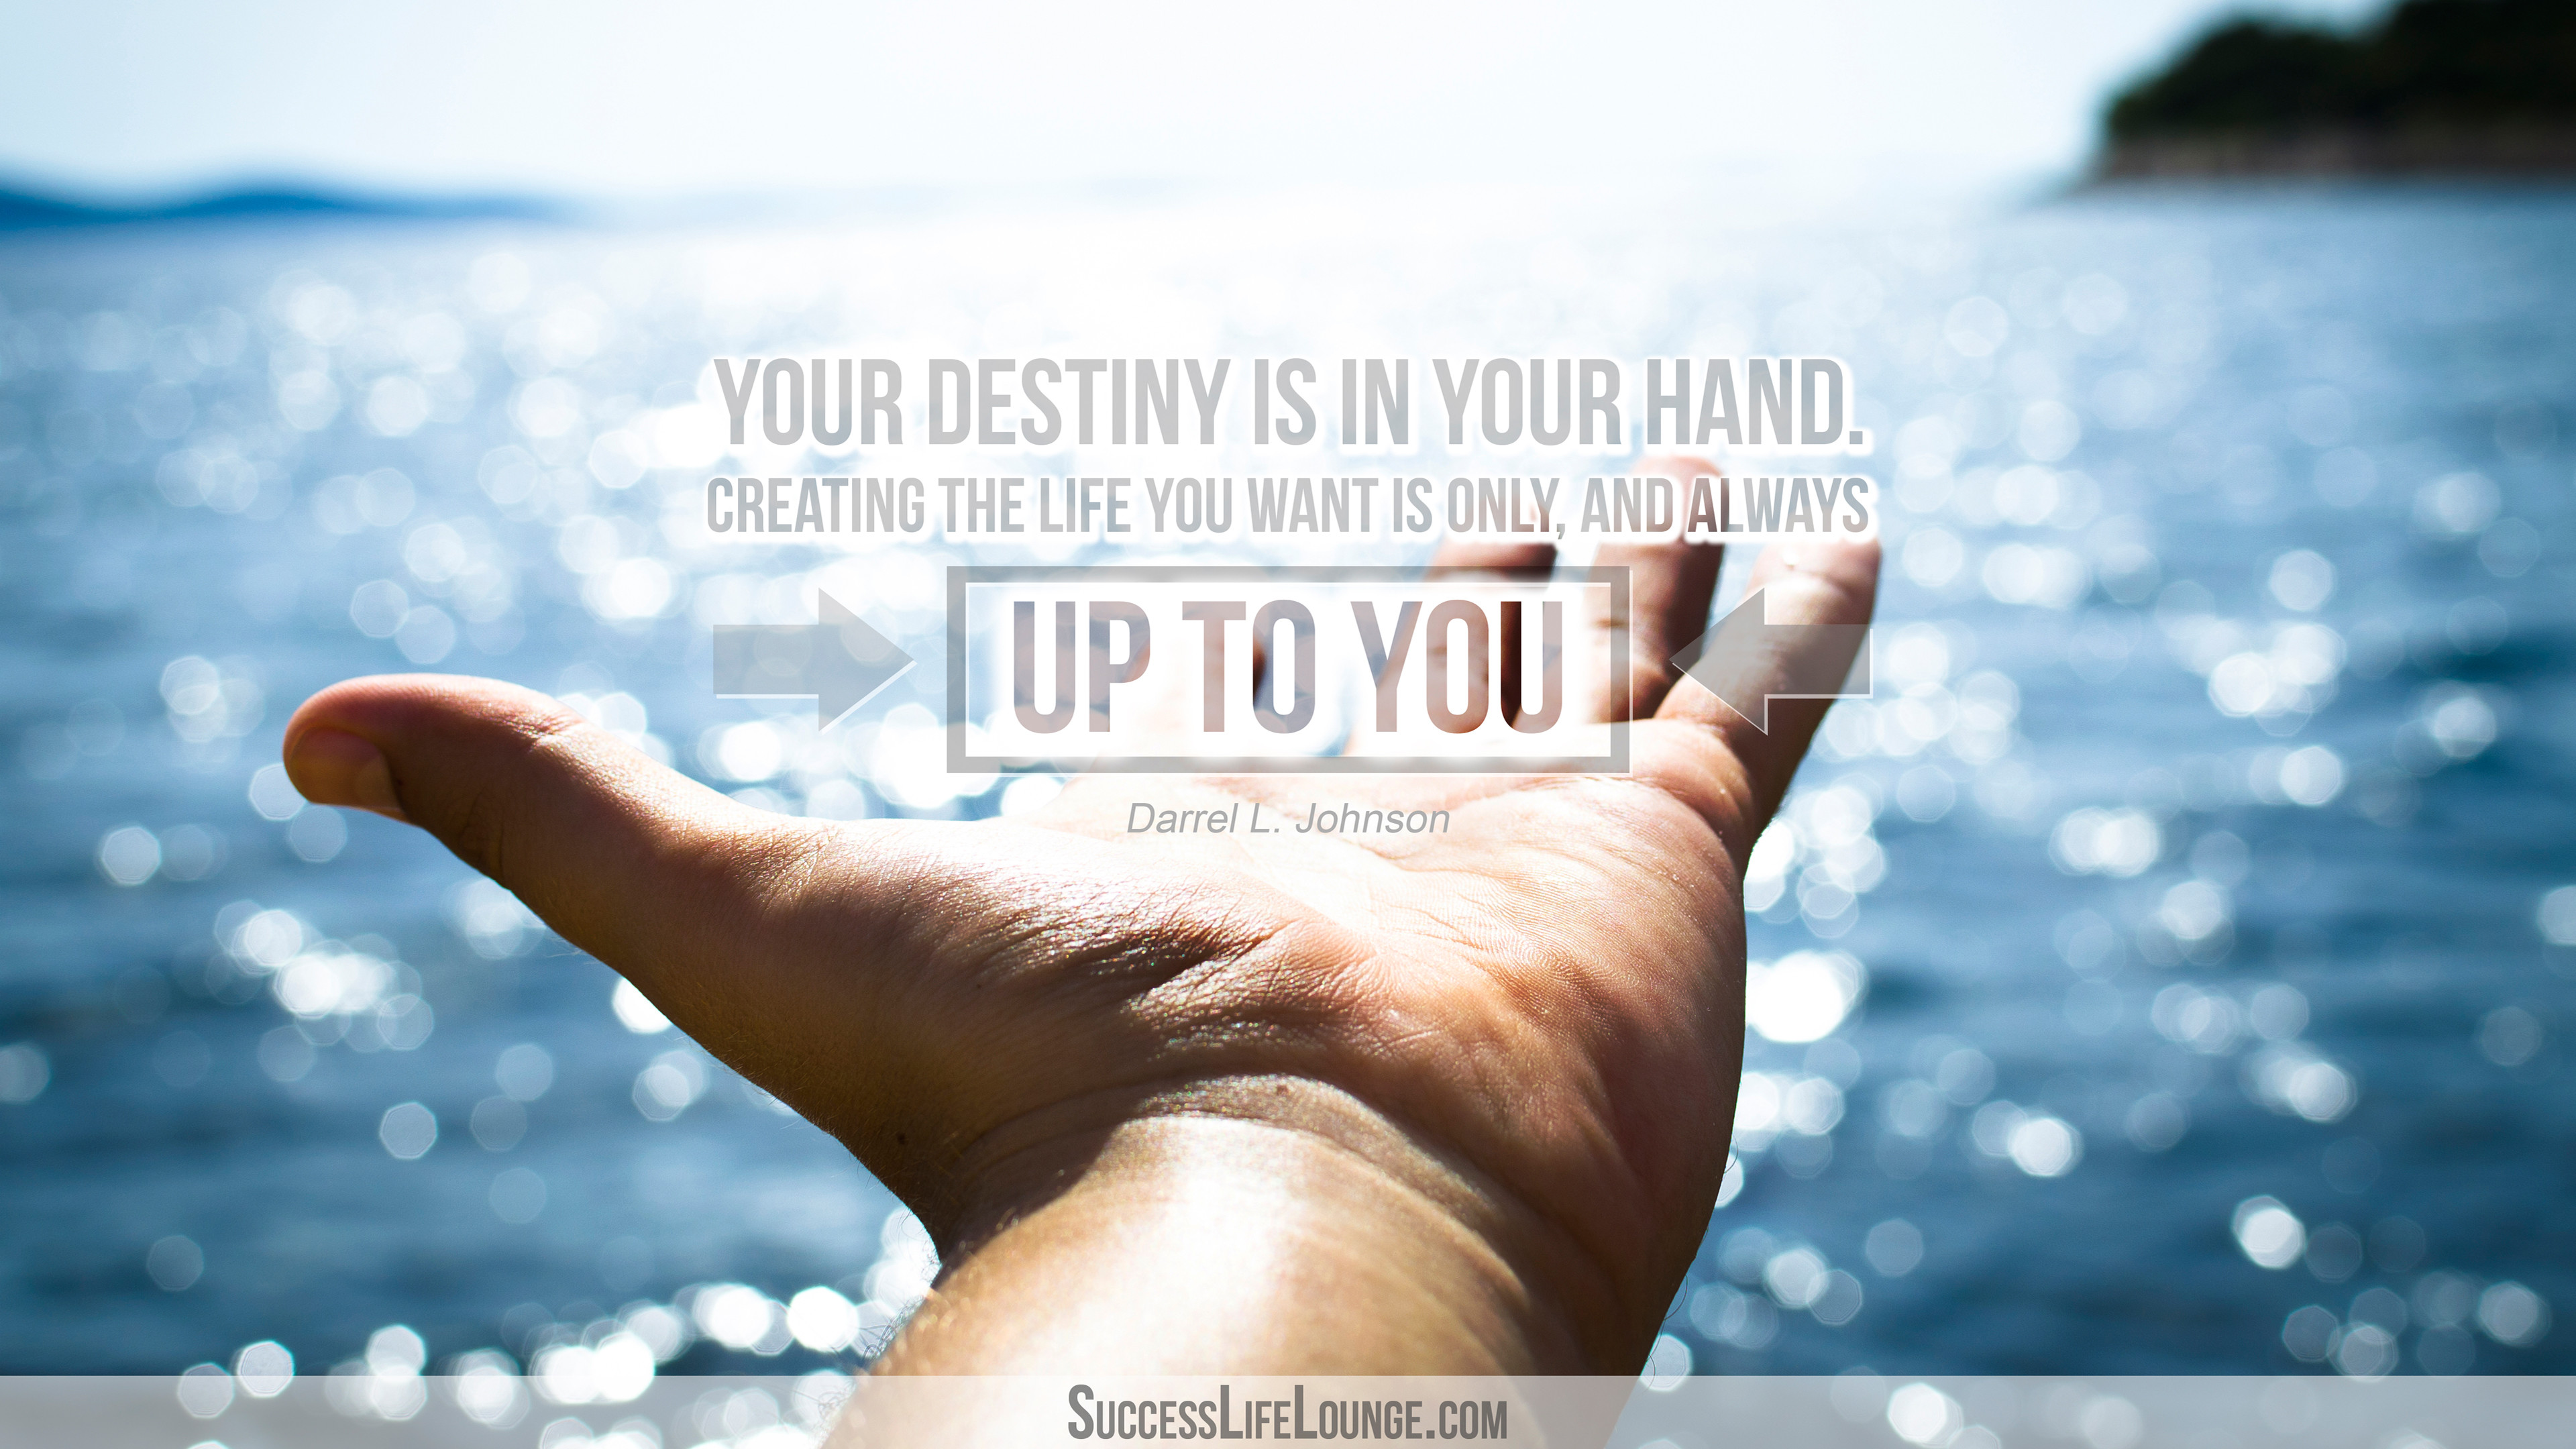 3840x2160 2. “Your destiny is in your hand. Creating the life you want is only, and  always up to you” – Wallpaper